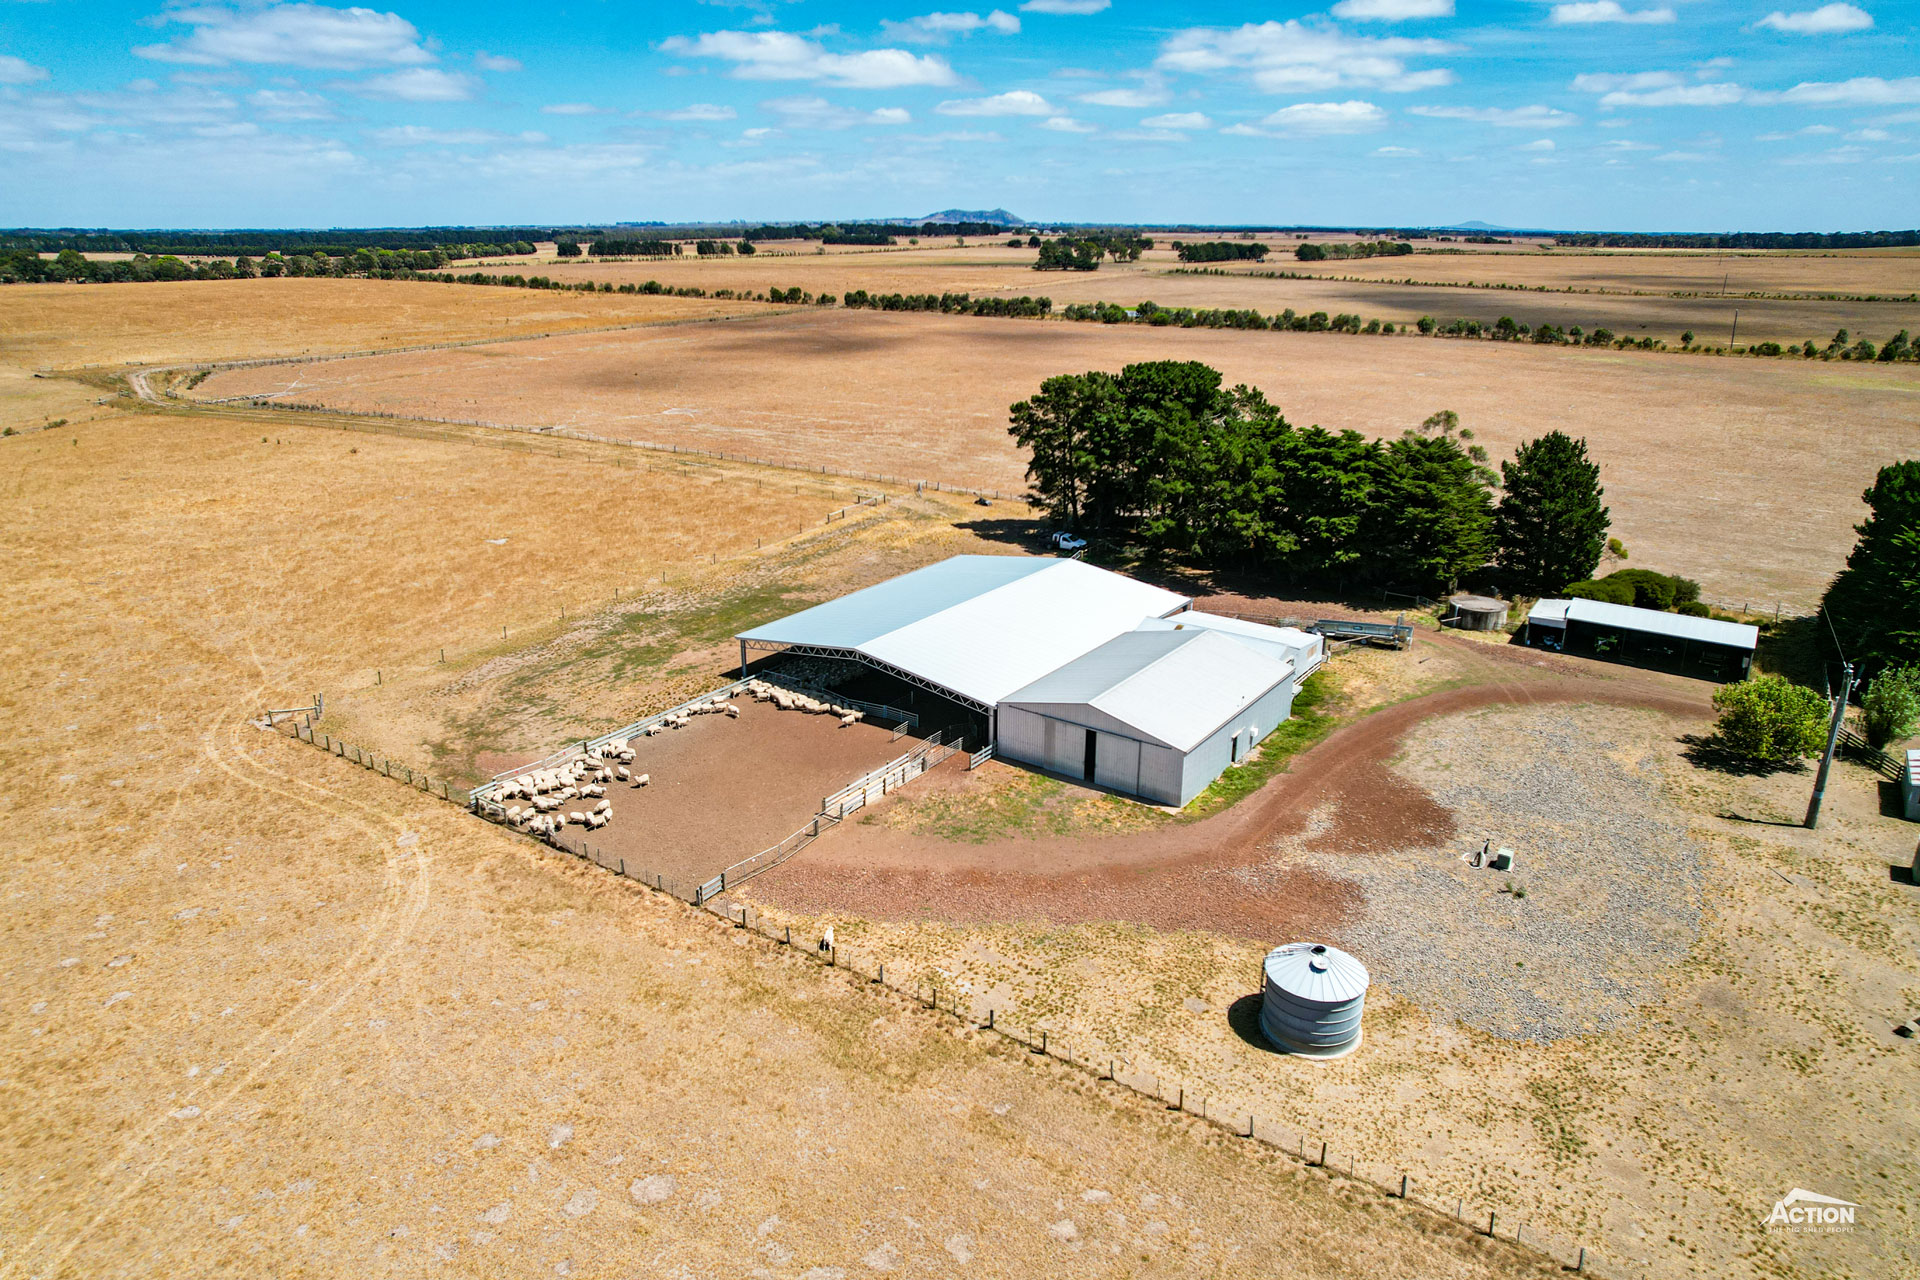 You are currently viewing 30m x 24m x 3.3m sheep yard cover